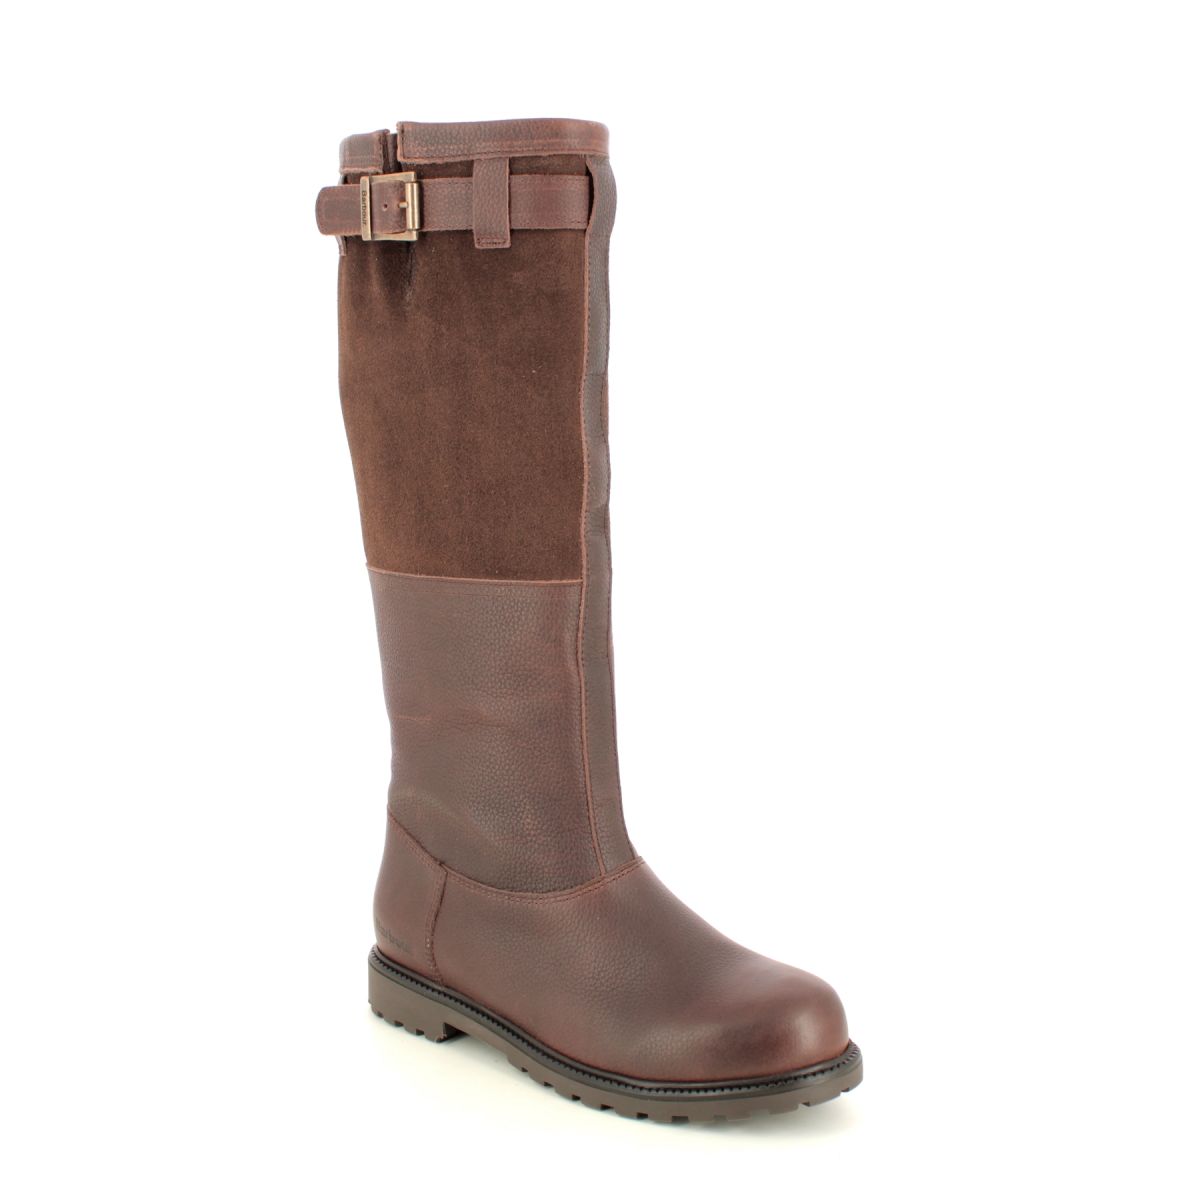 Barbour Acorn Tex Waterproof Brown leather Womens knee-high boots LFO0447-BR92 in a Plain Leather in Size 5